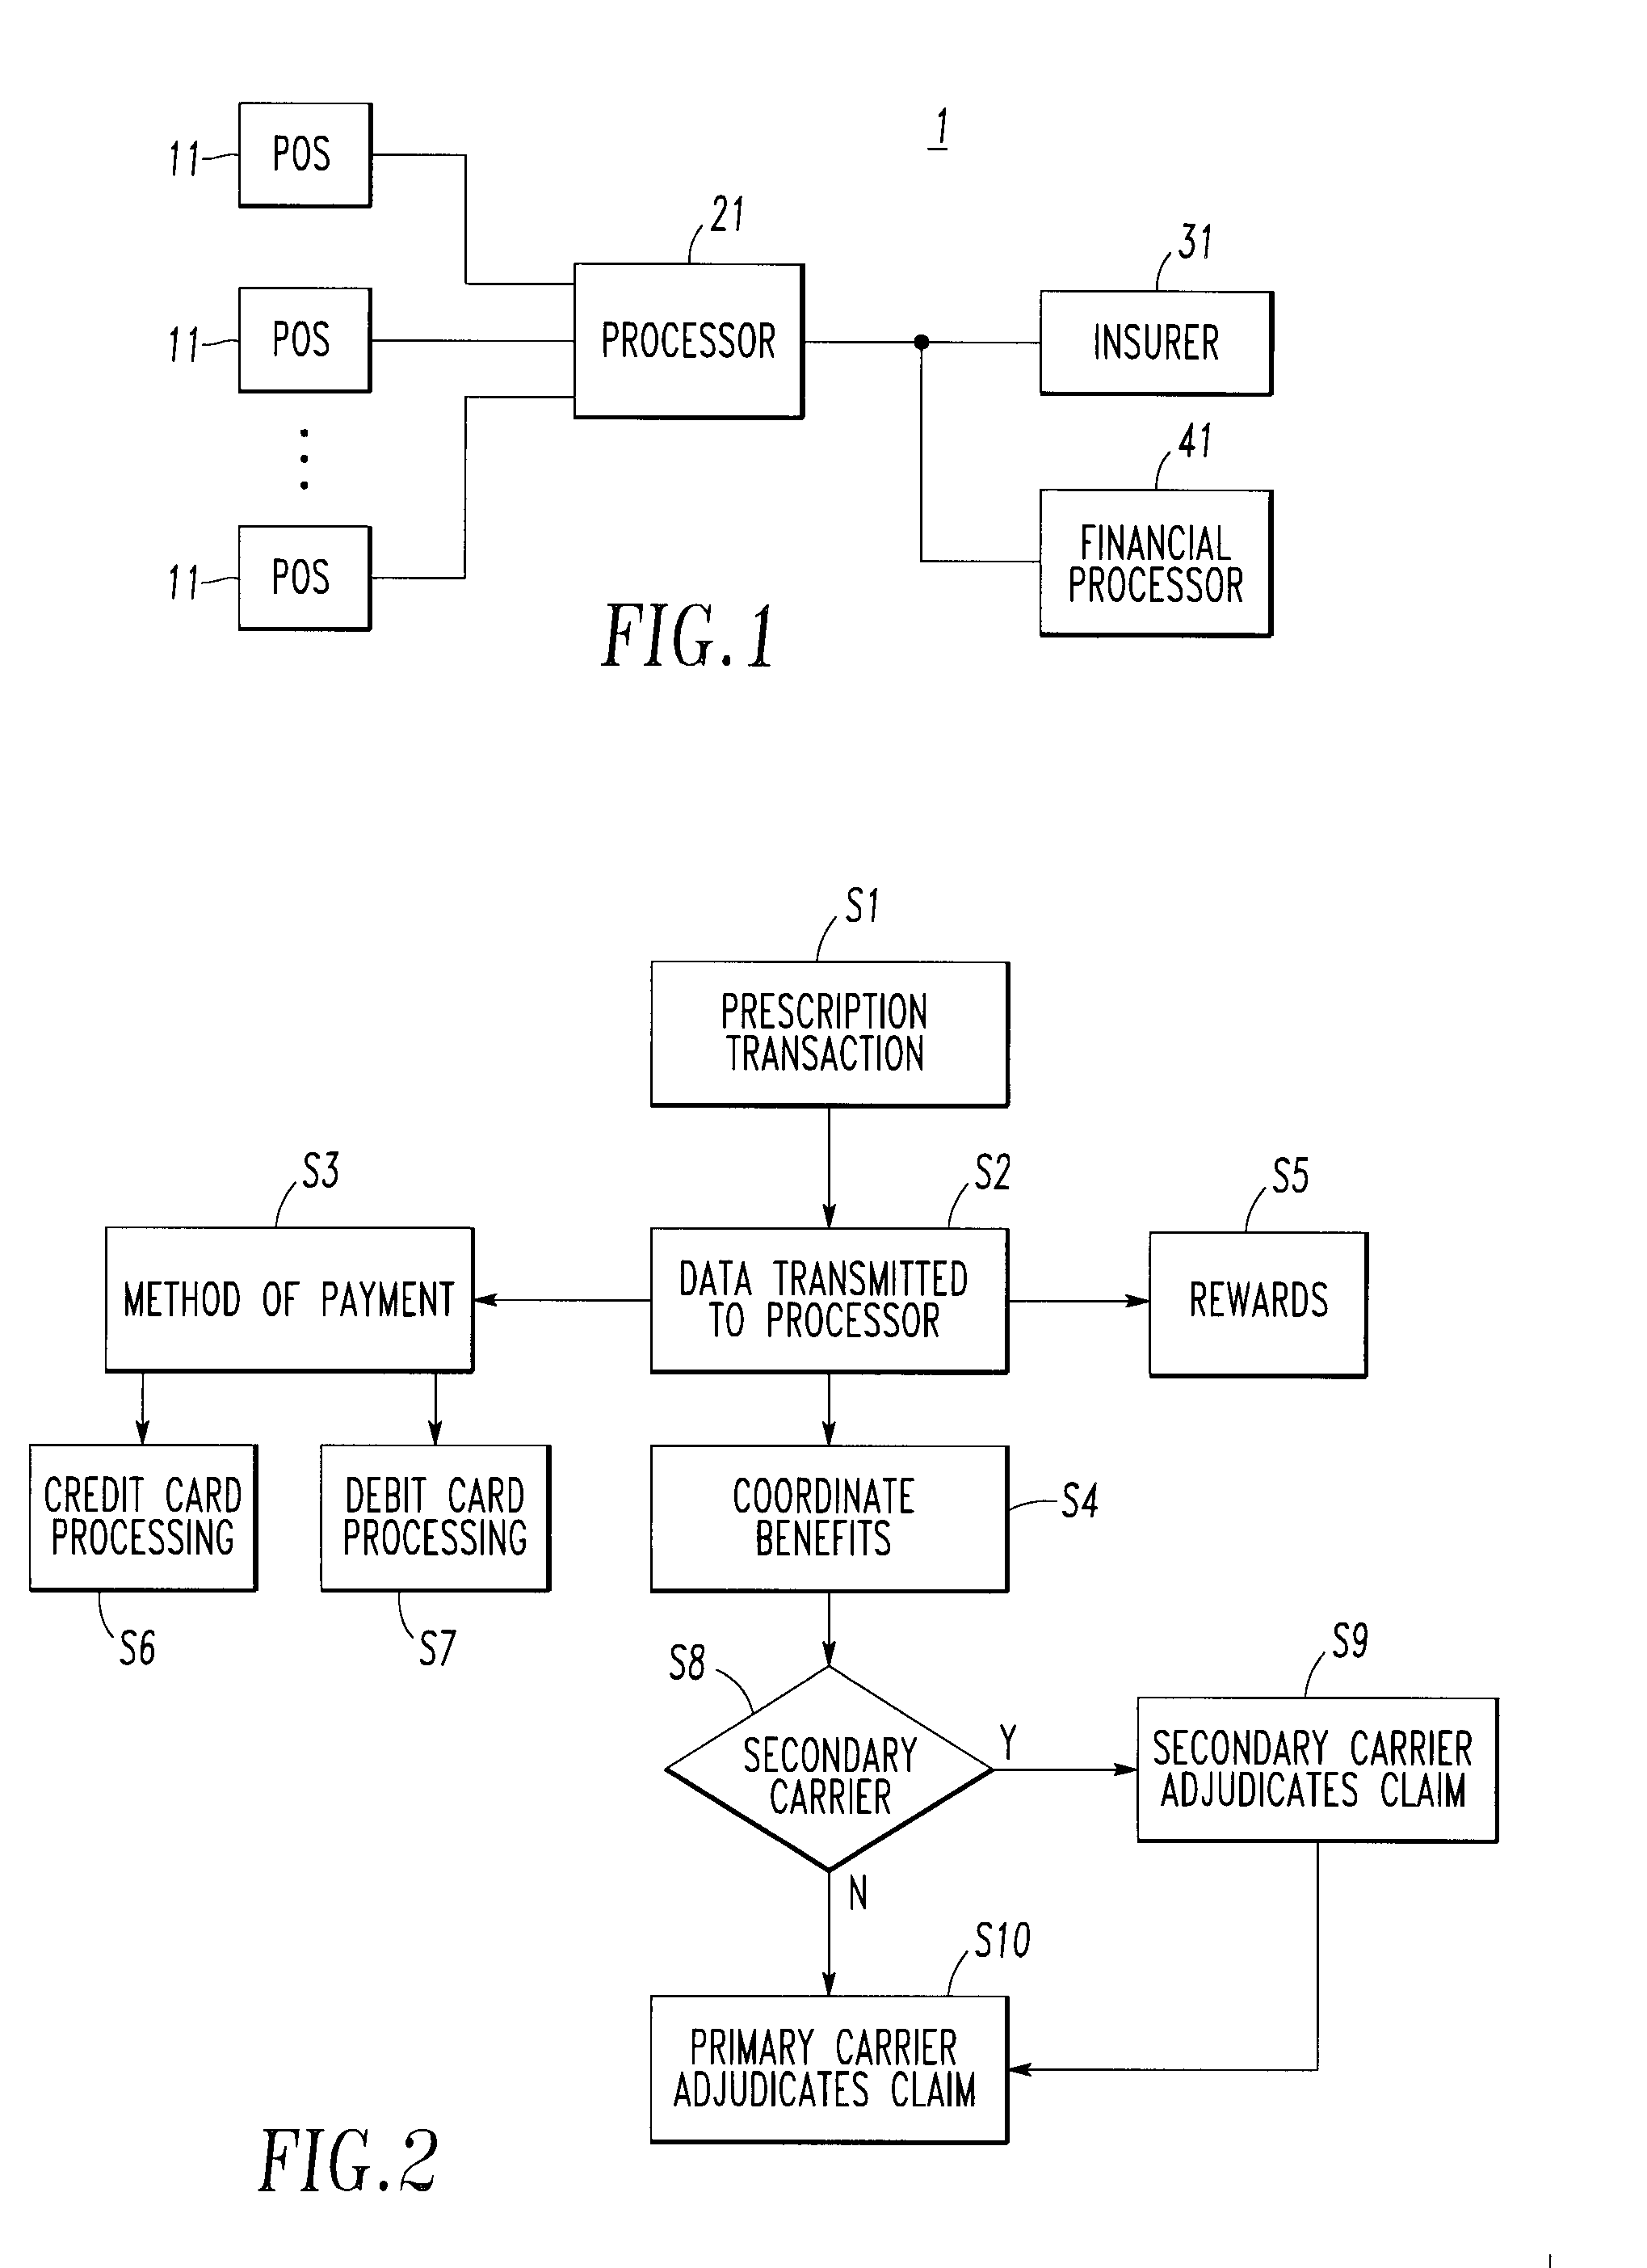 Integrated pharmaceutical accounts management system and method